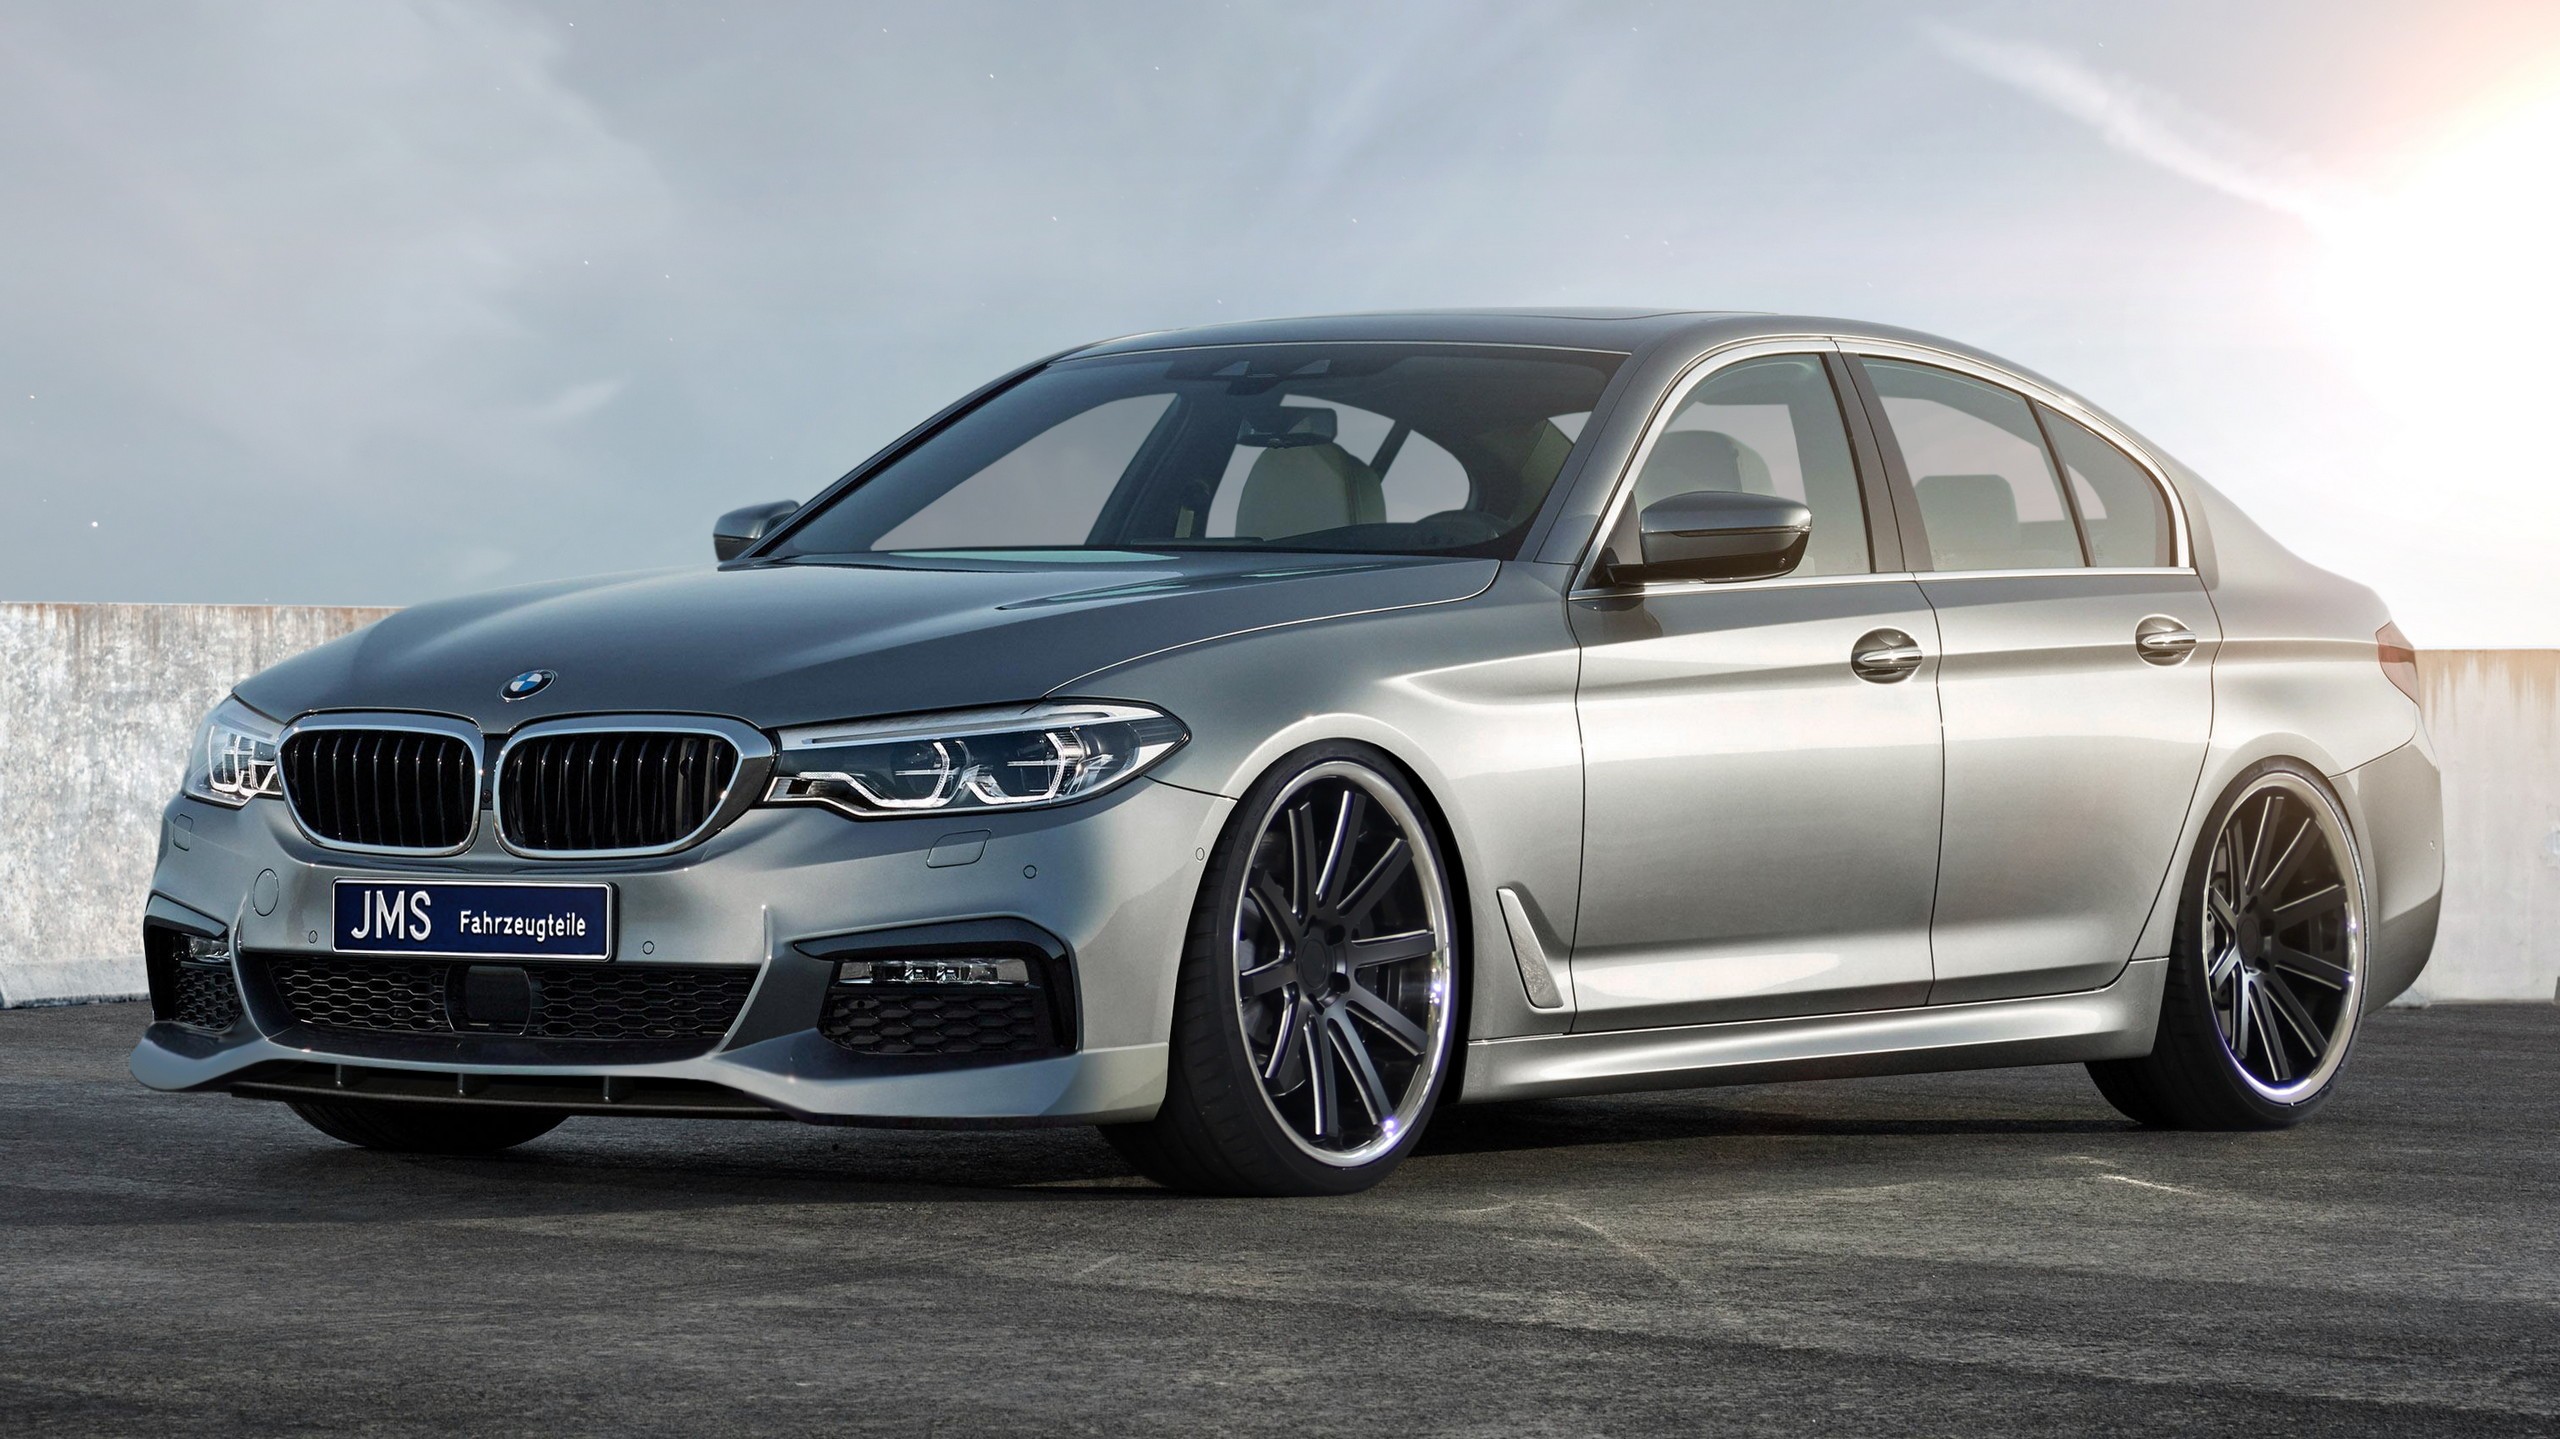 Tuner Wants to Make Your G30/G31 BMW 5 Series Sportier With New